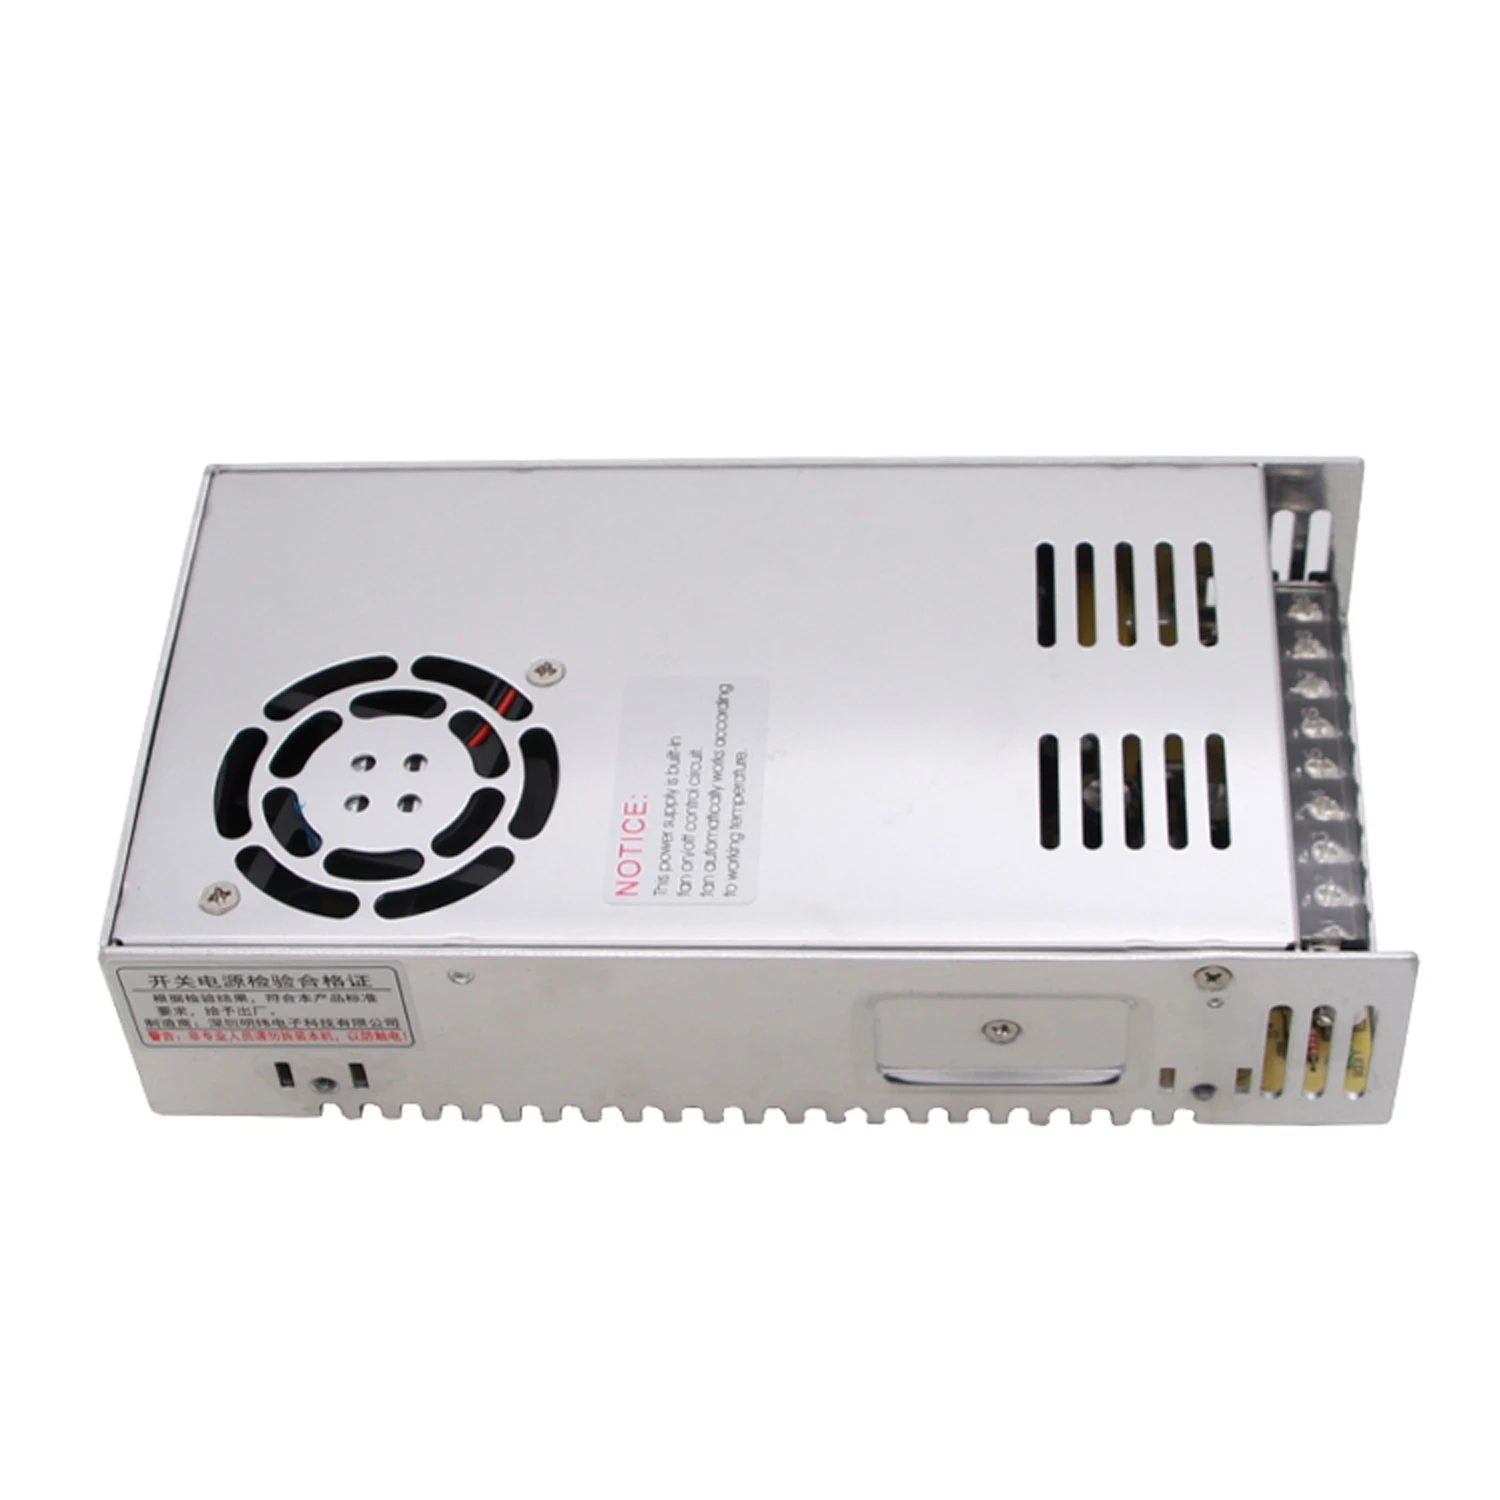 At DE｜400W 24V 16.6A Single Output Switch Power Supply for CNC Engraving Machine 